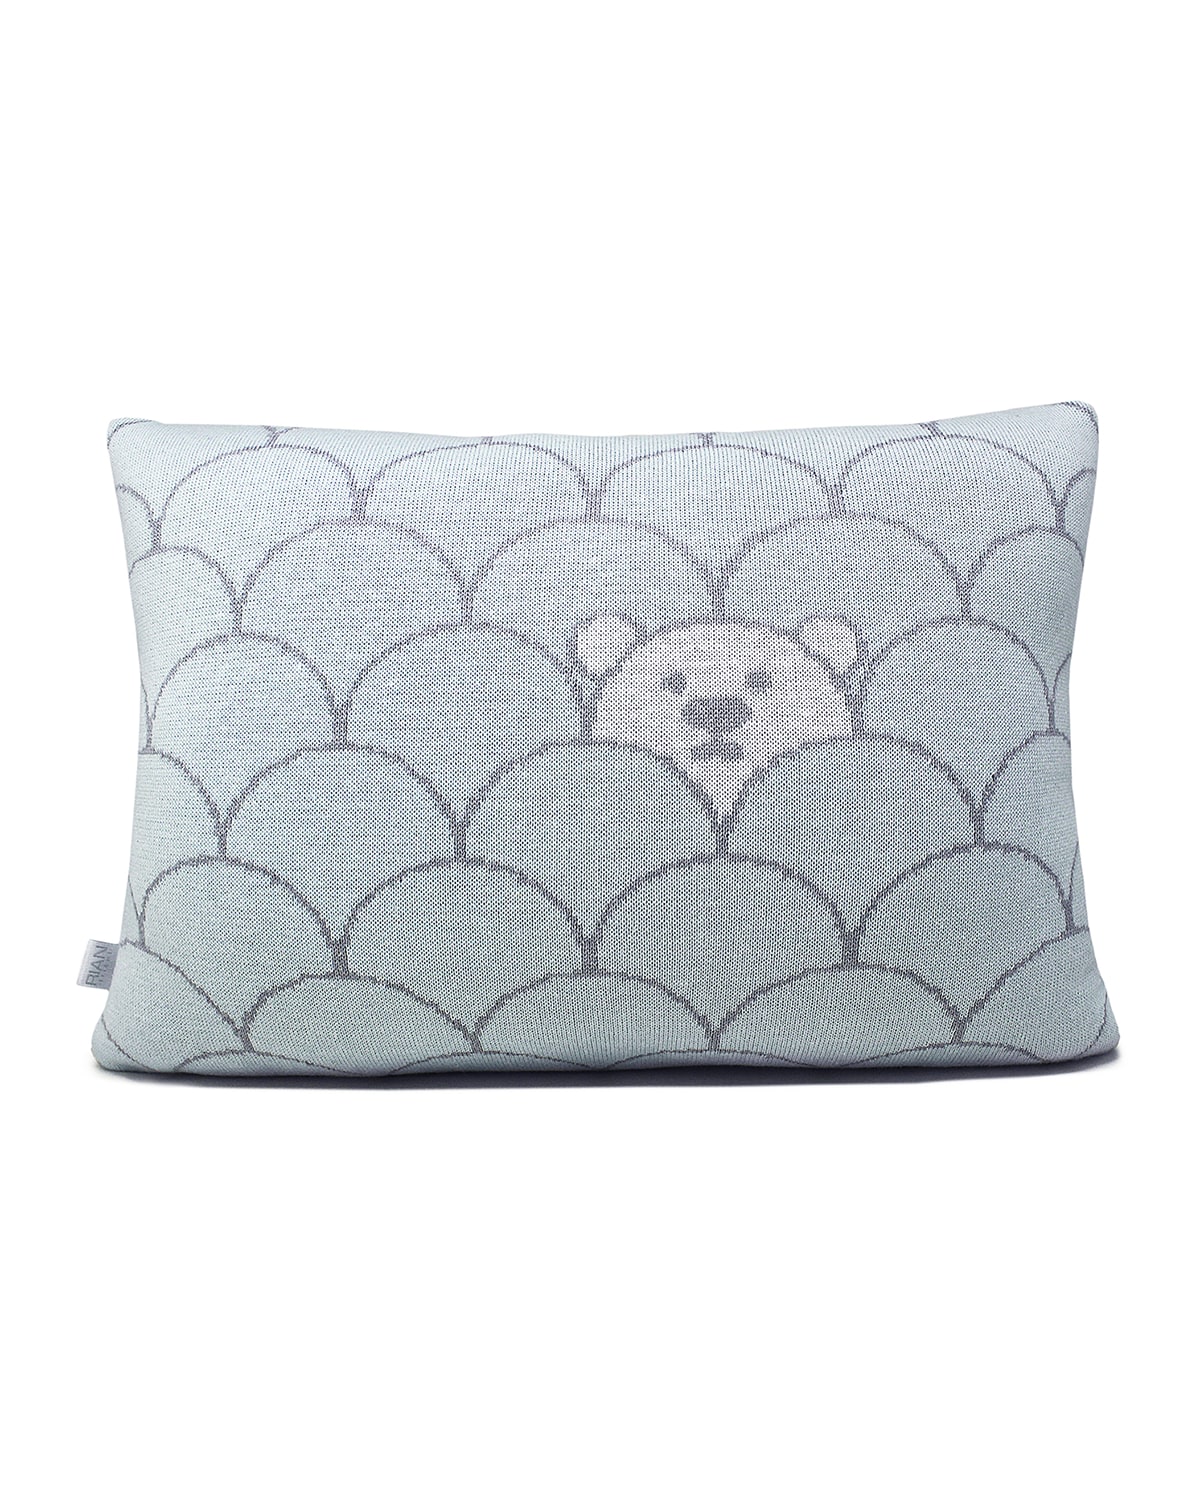 RIAN TRICOT WALLY PILLOW,PROD226940364